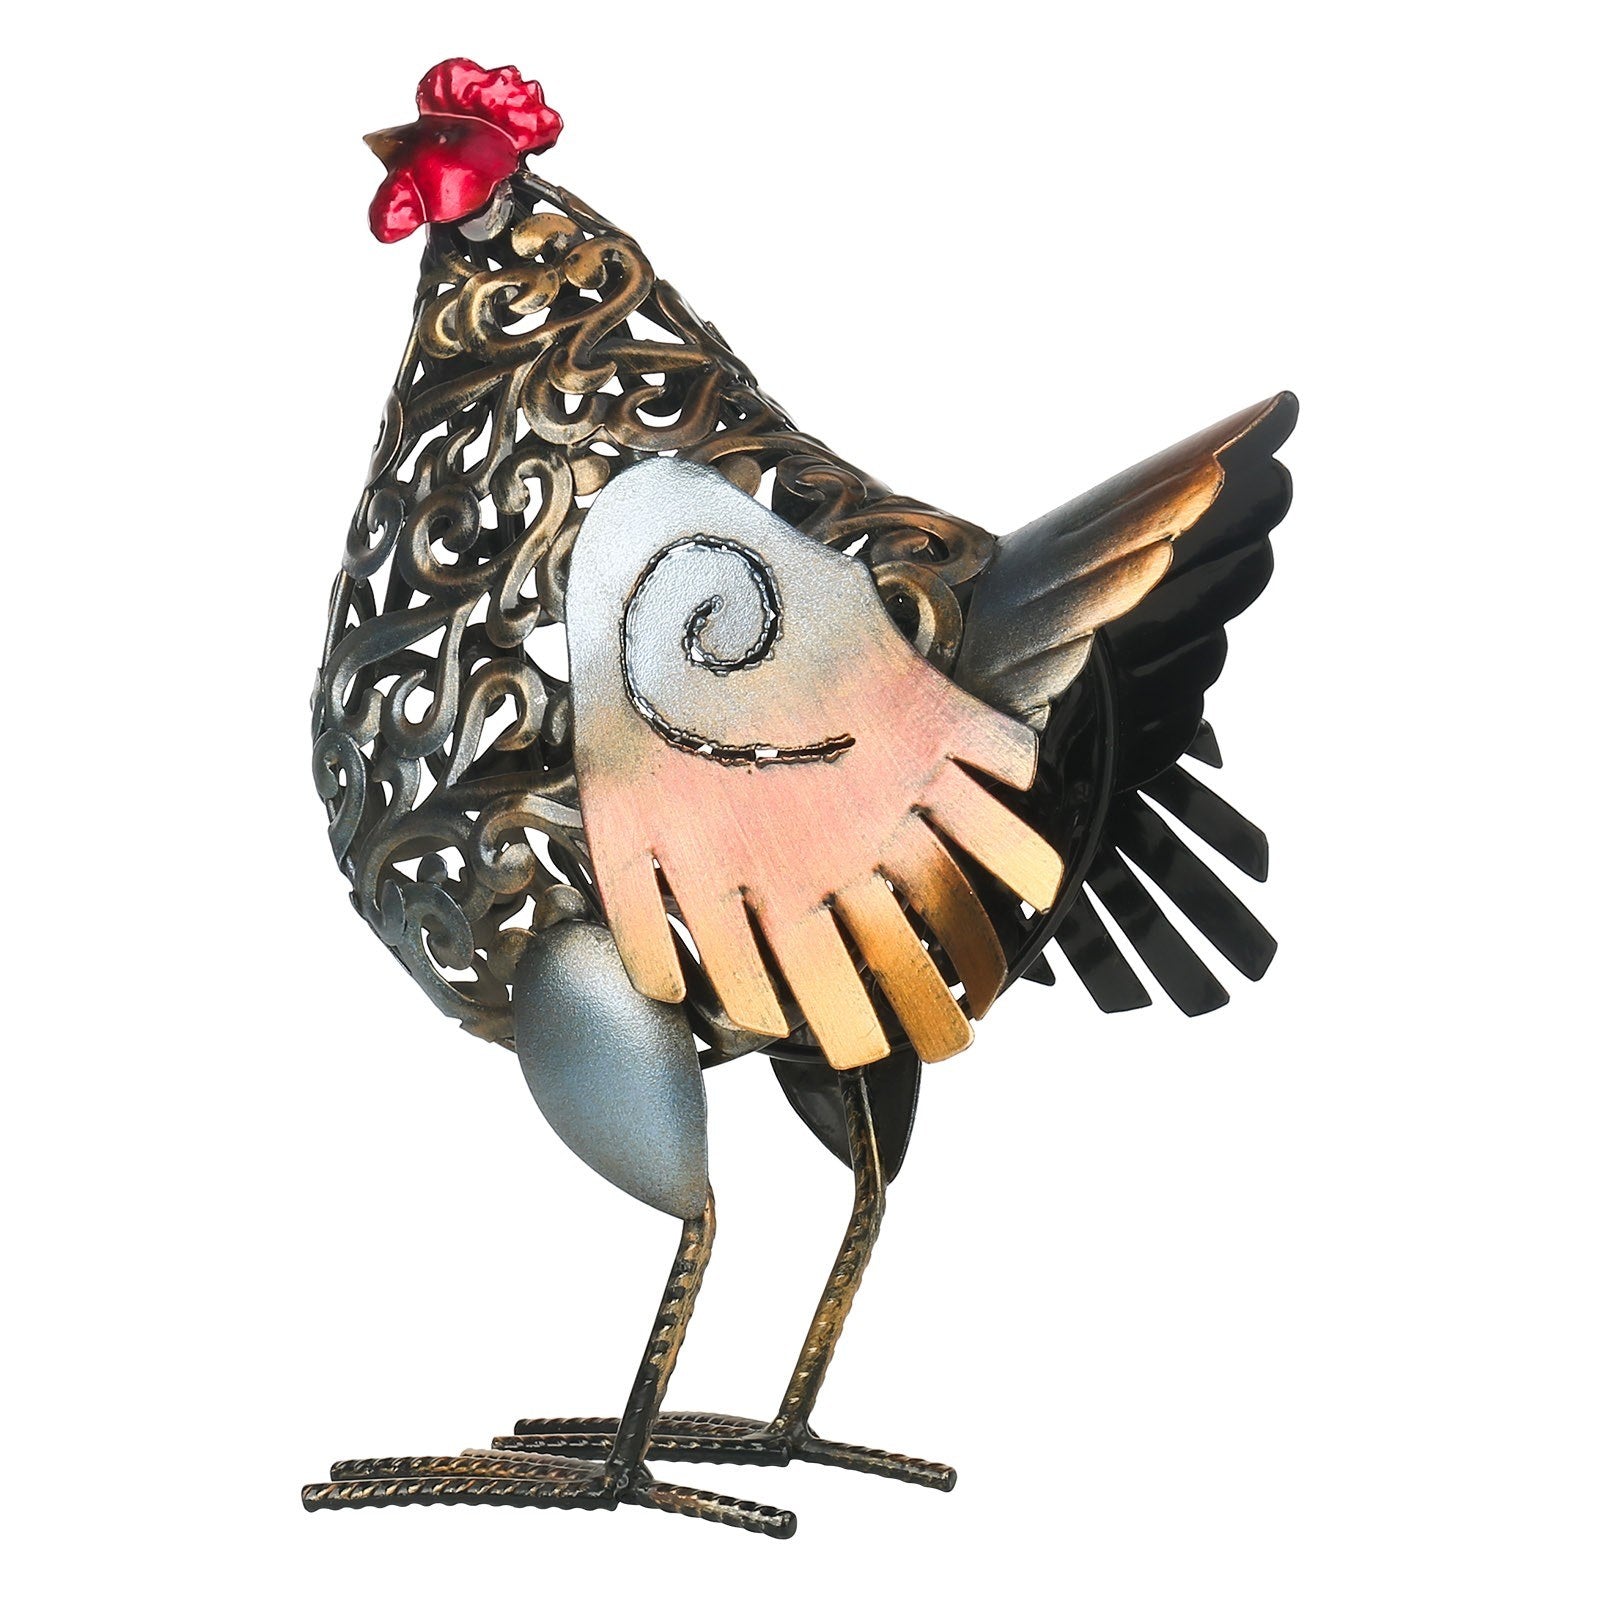 Our metal rooster sculpture is perfect for your garden or yard decor